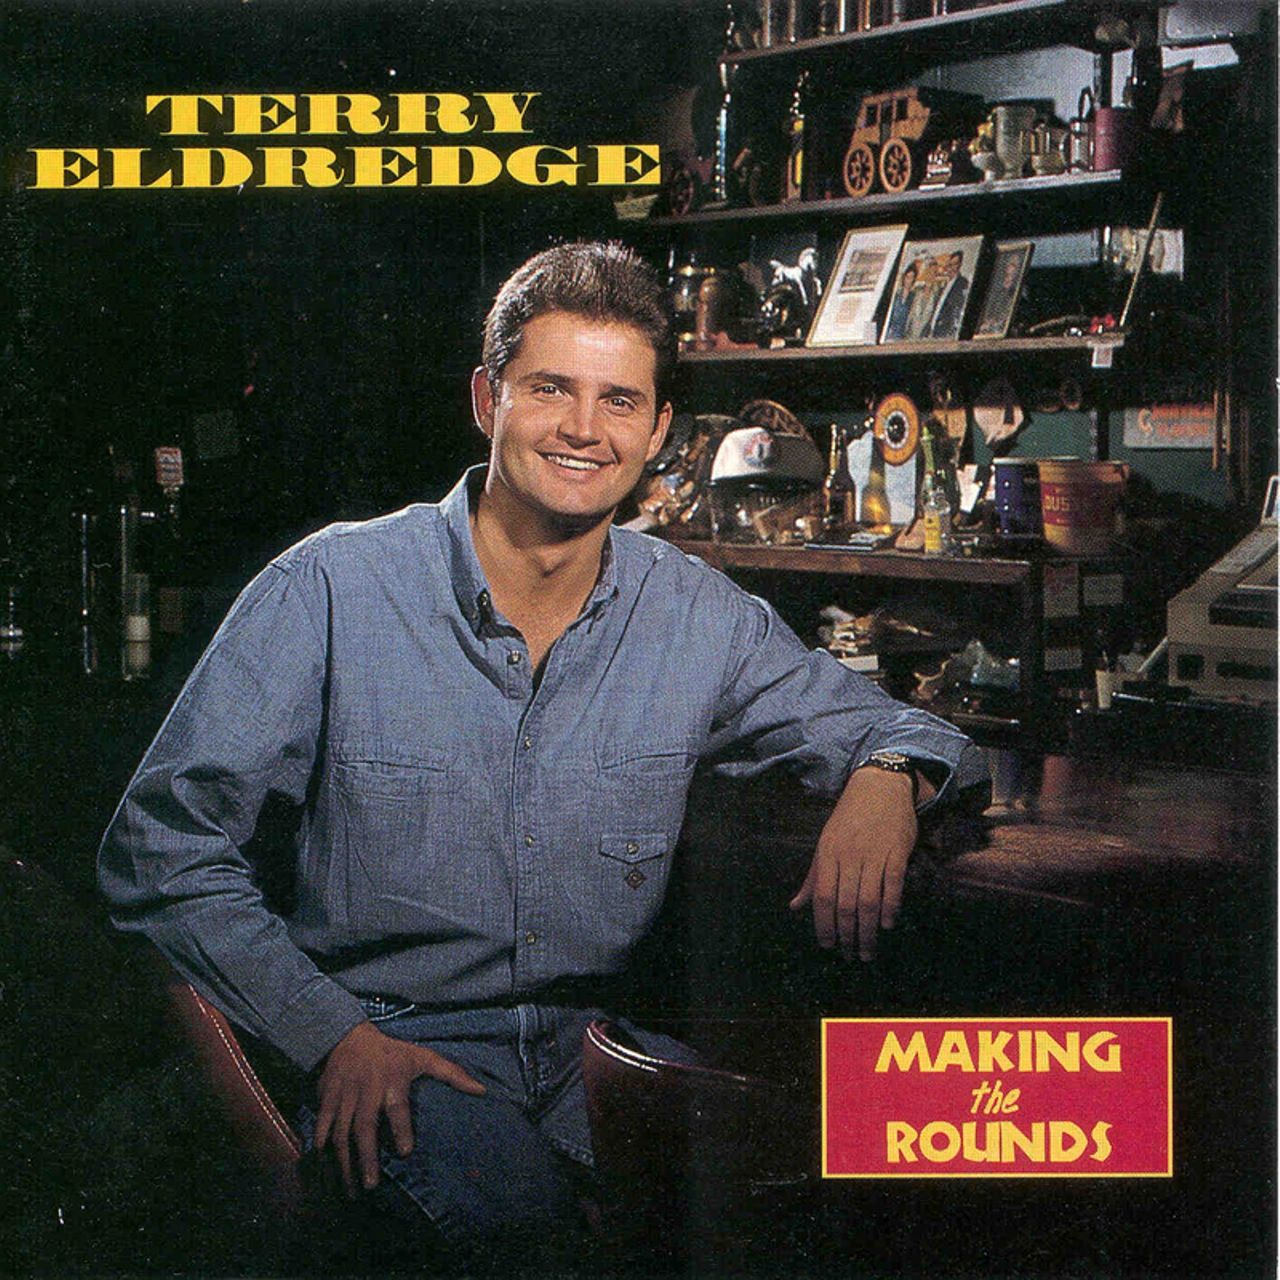 Terry Eldredge - Making The Rounds cover album